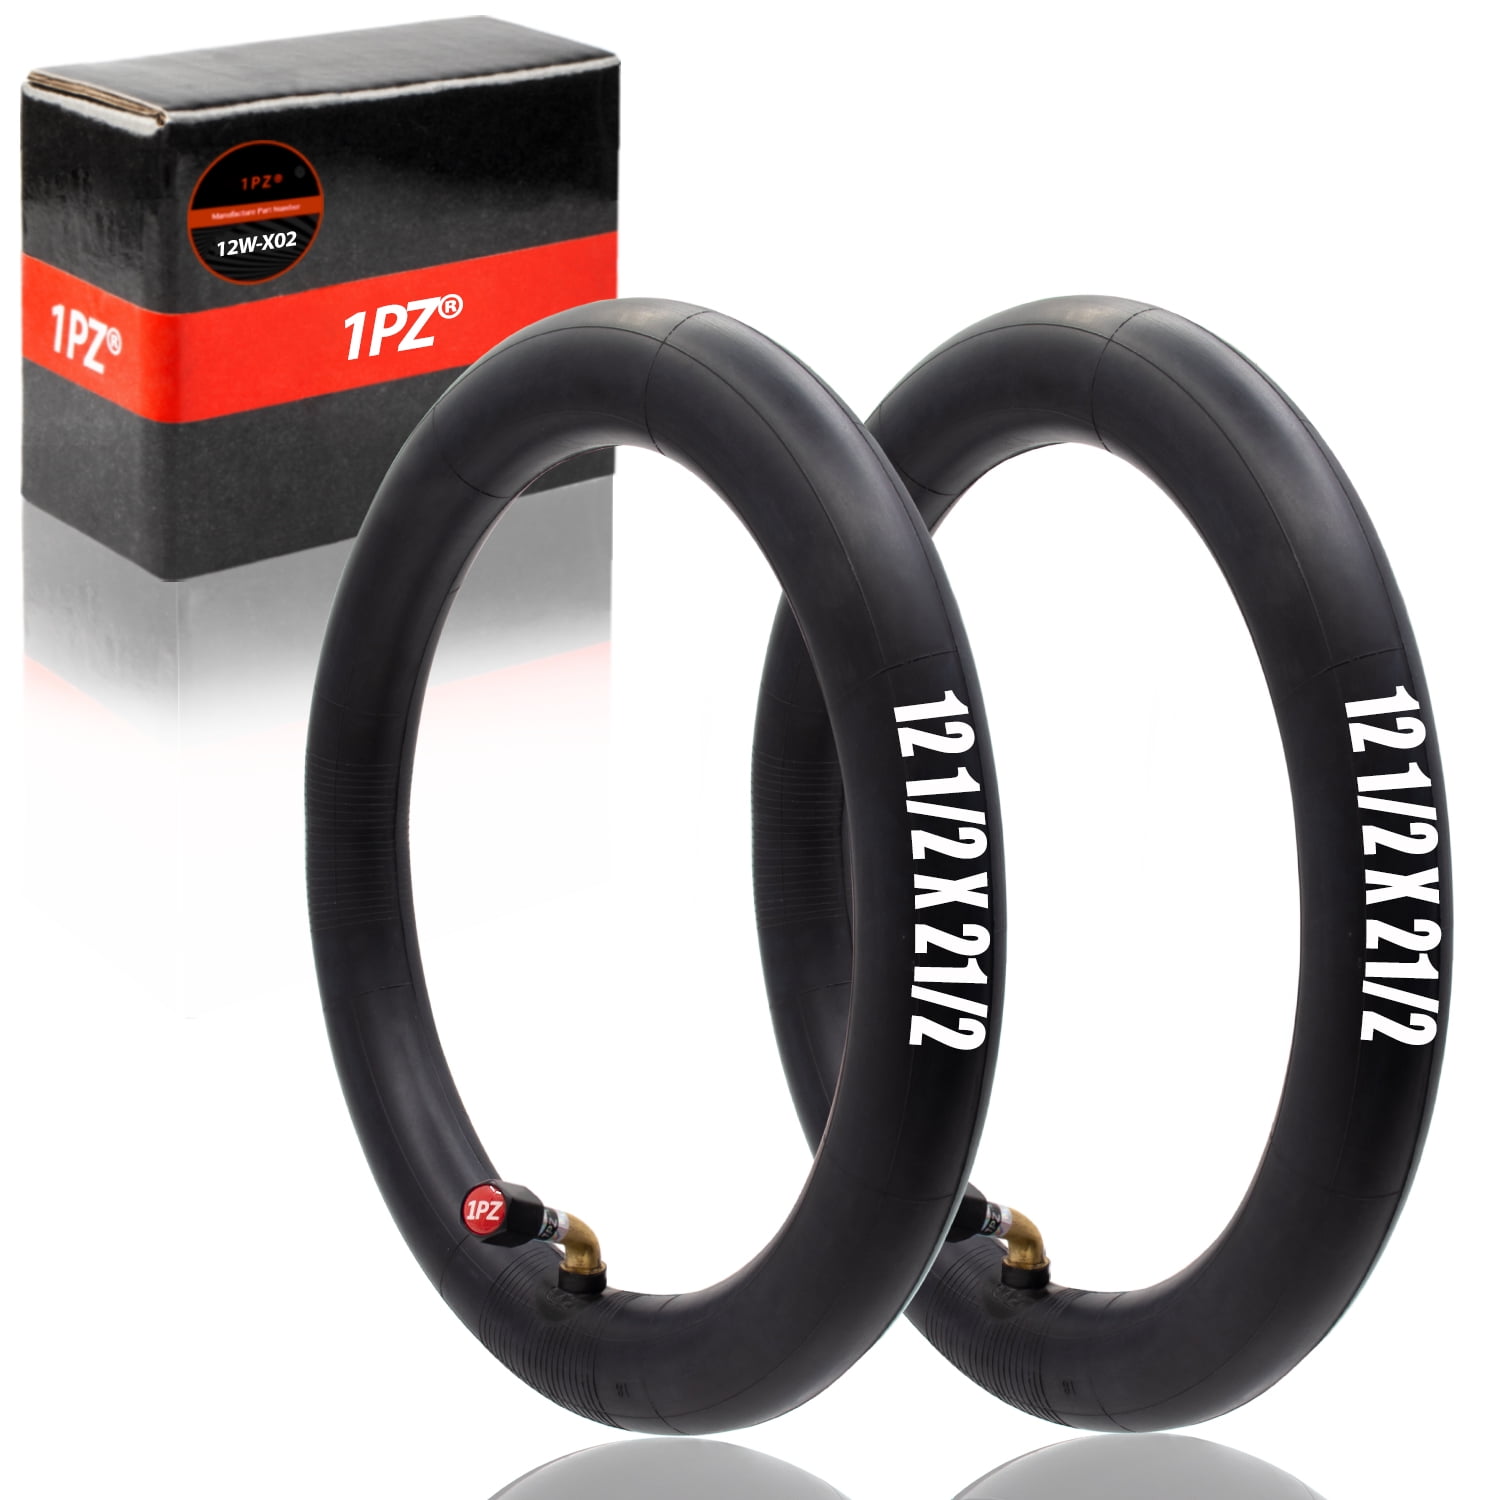 2 x 18" inch Inner Tube 18 x 1.75-2.125 & Tire Levers Bike Bicycle Rubber BMX 